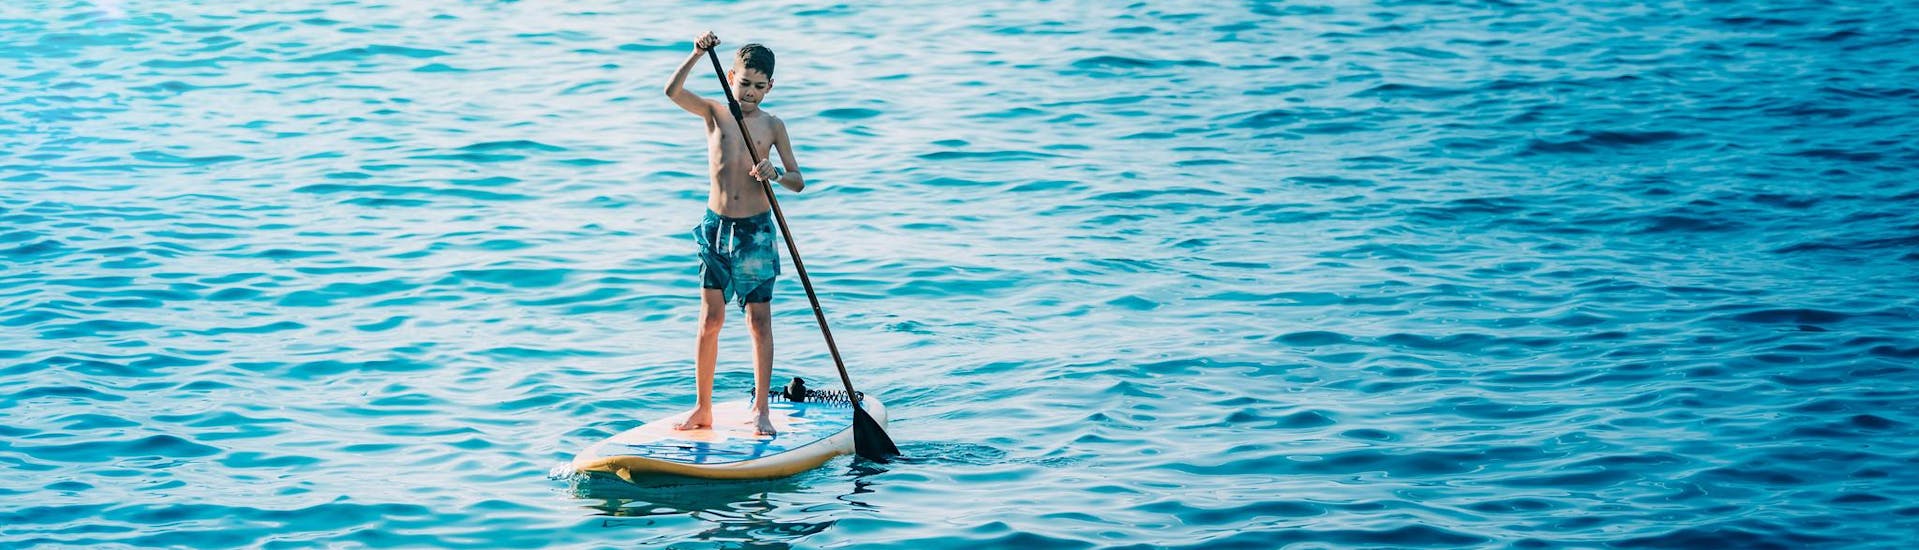 A kid on a board during a boat trip with SUP boards included on board.